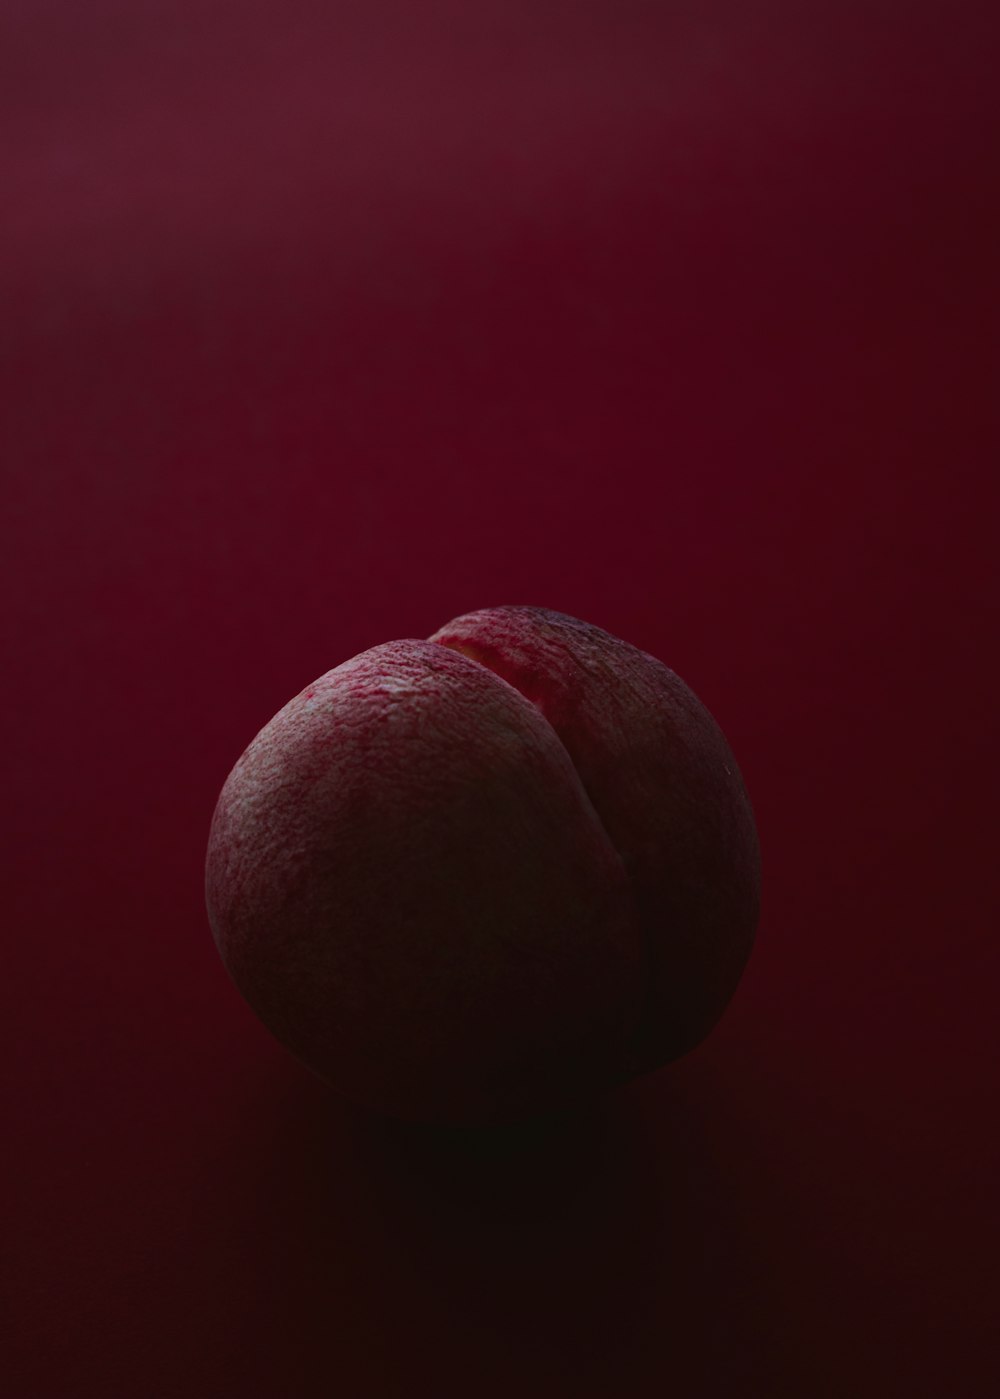 brown ball on red surface